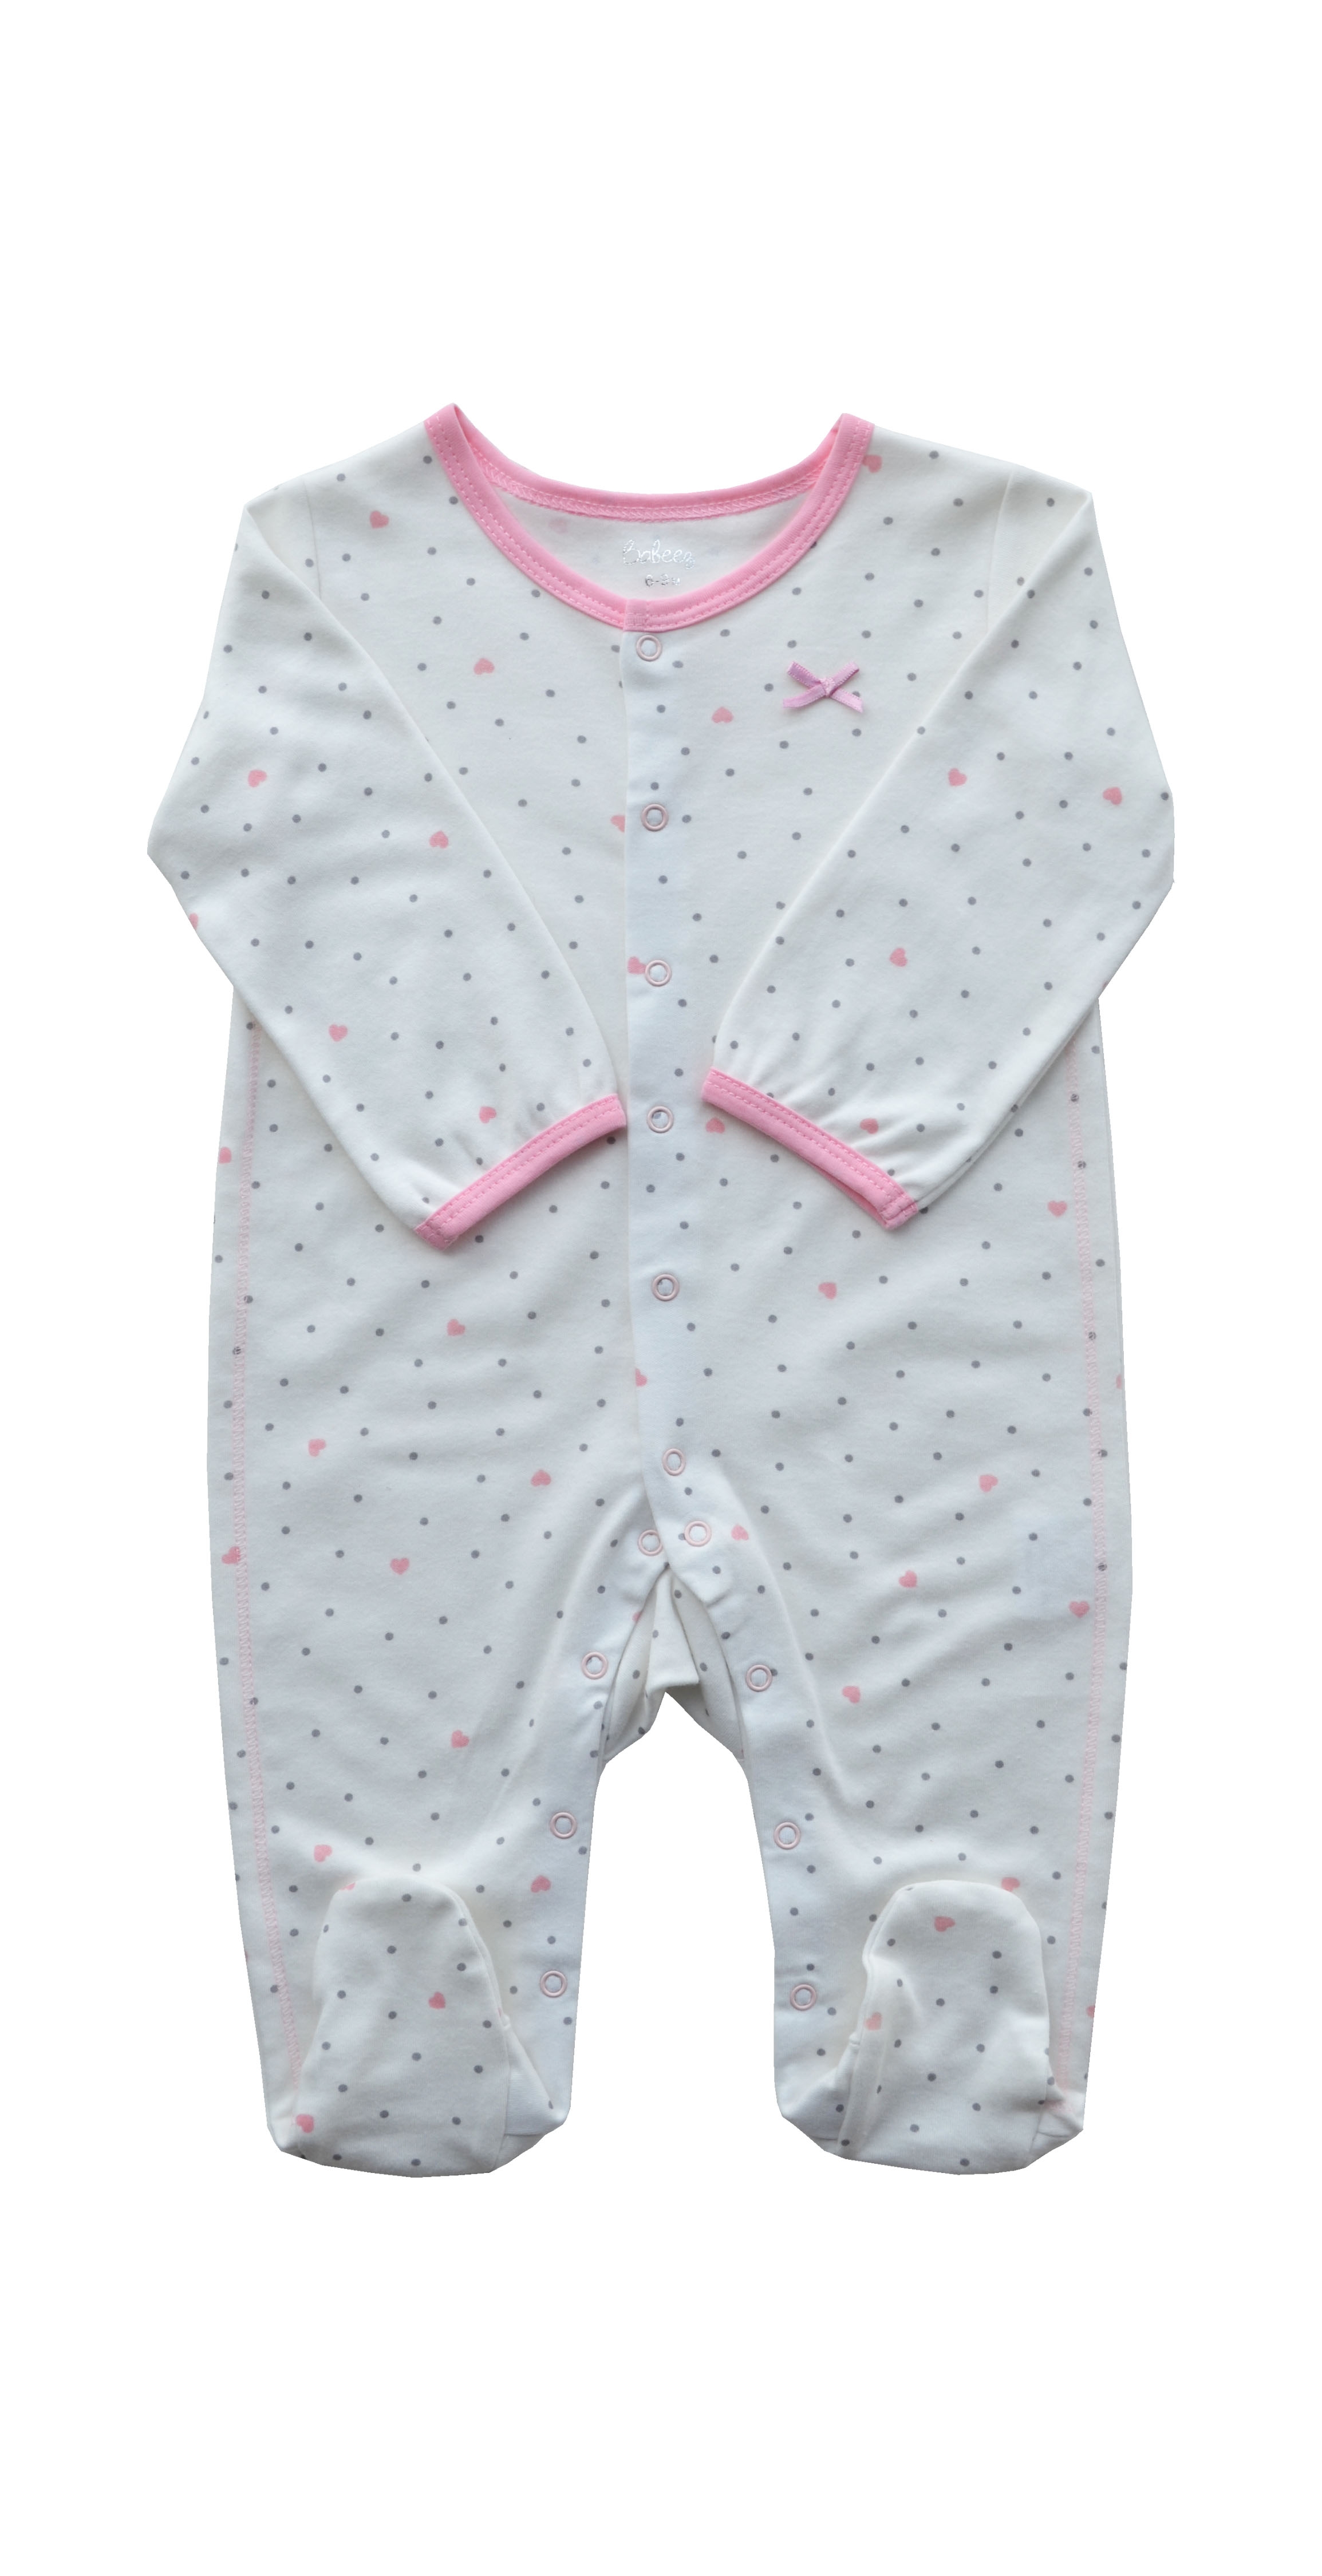 Allover Dots and Heart Print on Offwhite Sleeper with Feet(100% Cotton Interlock)